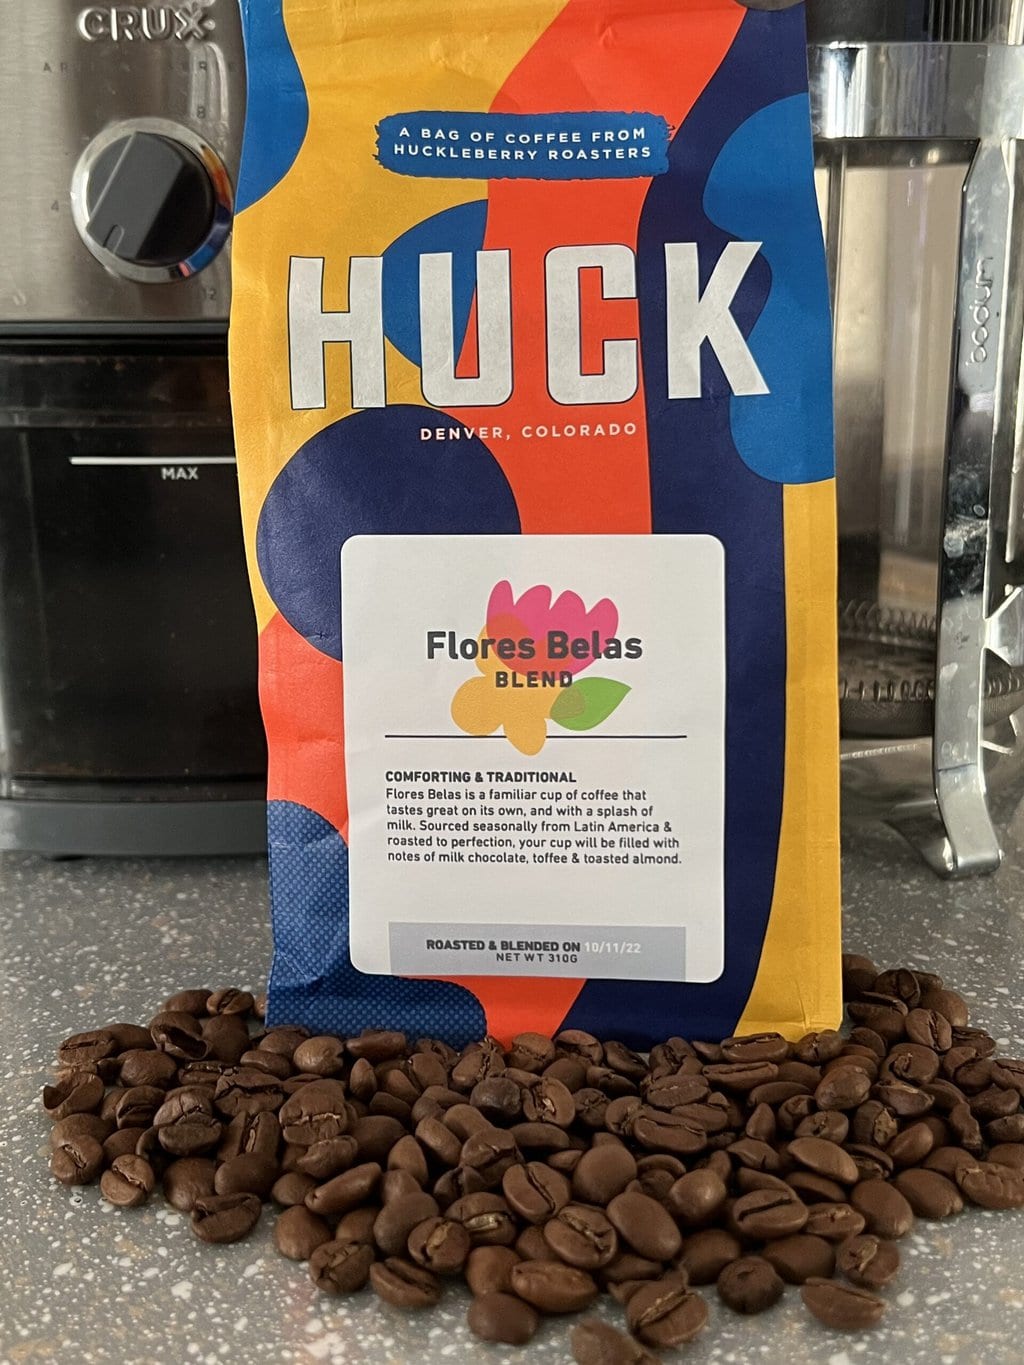 Coffee beans scattered next to a pack of Huck Coffee